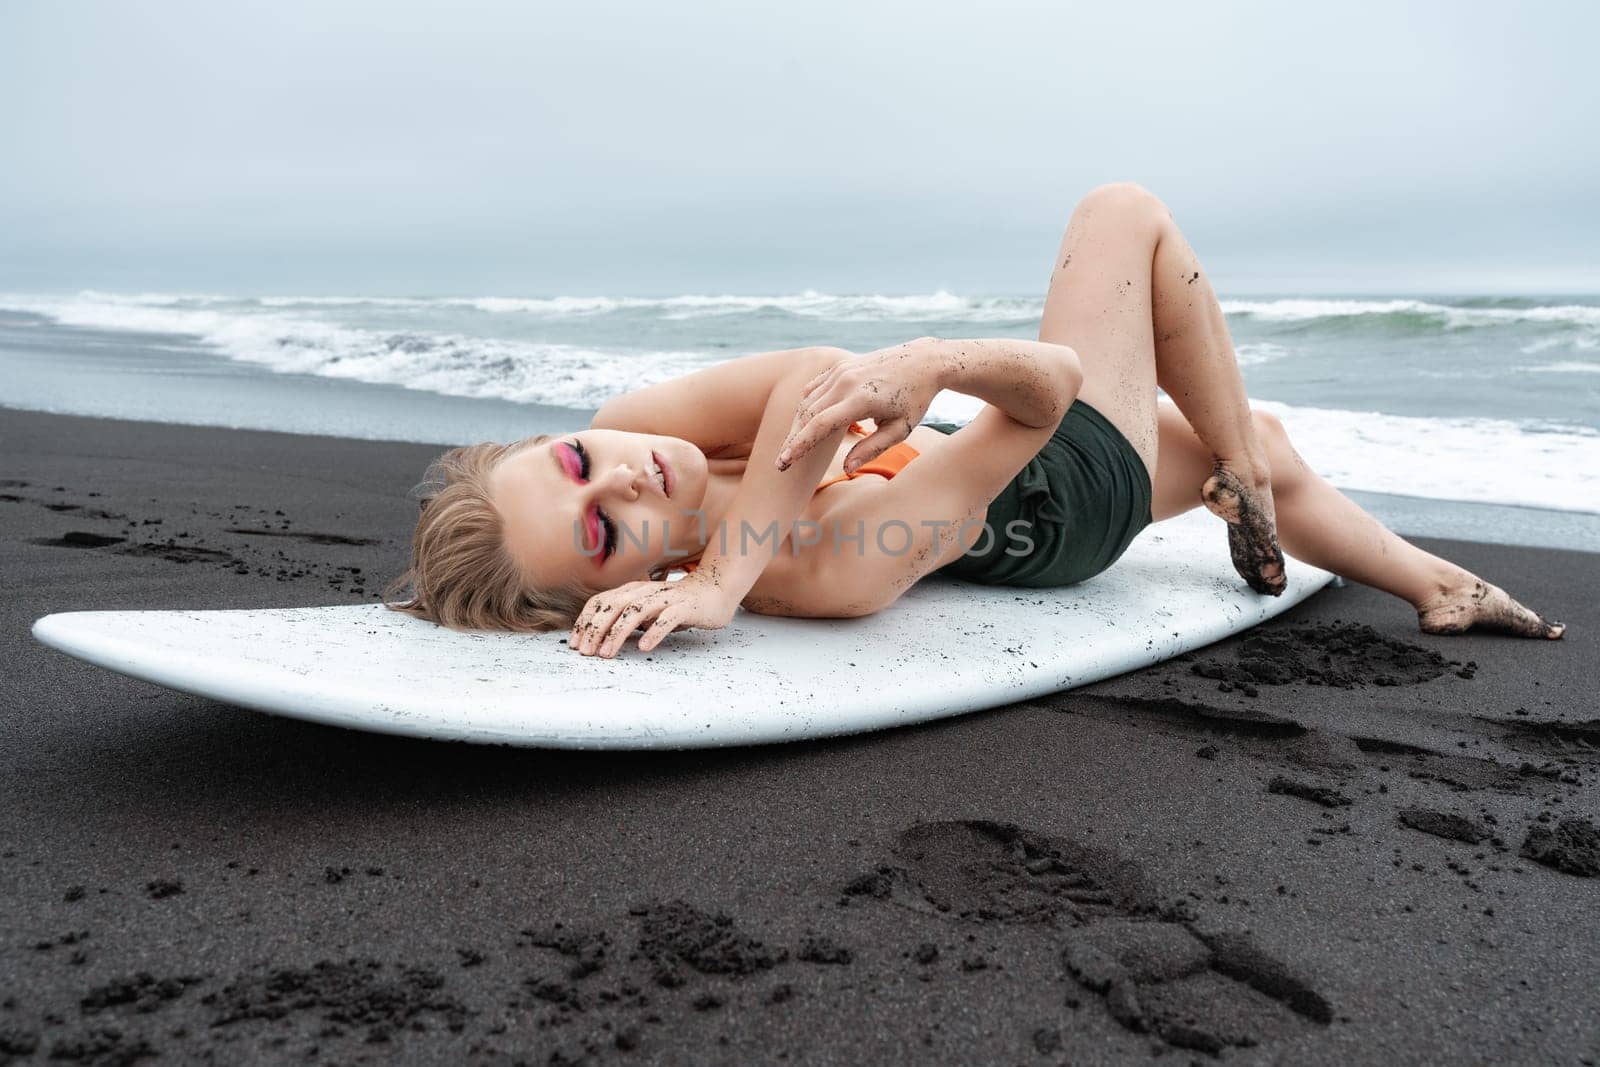 Female surfer is lying on white surfboard on black sandy beach. Sports fashion model with closed eyes is posing in bikini top and shorts, showing off her fit and athletic body after an intense workout